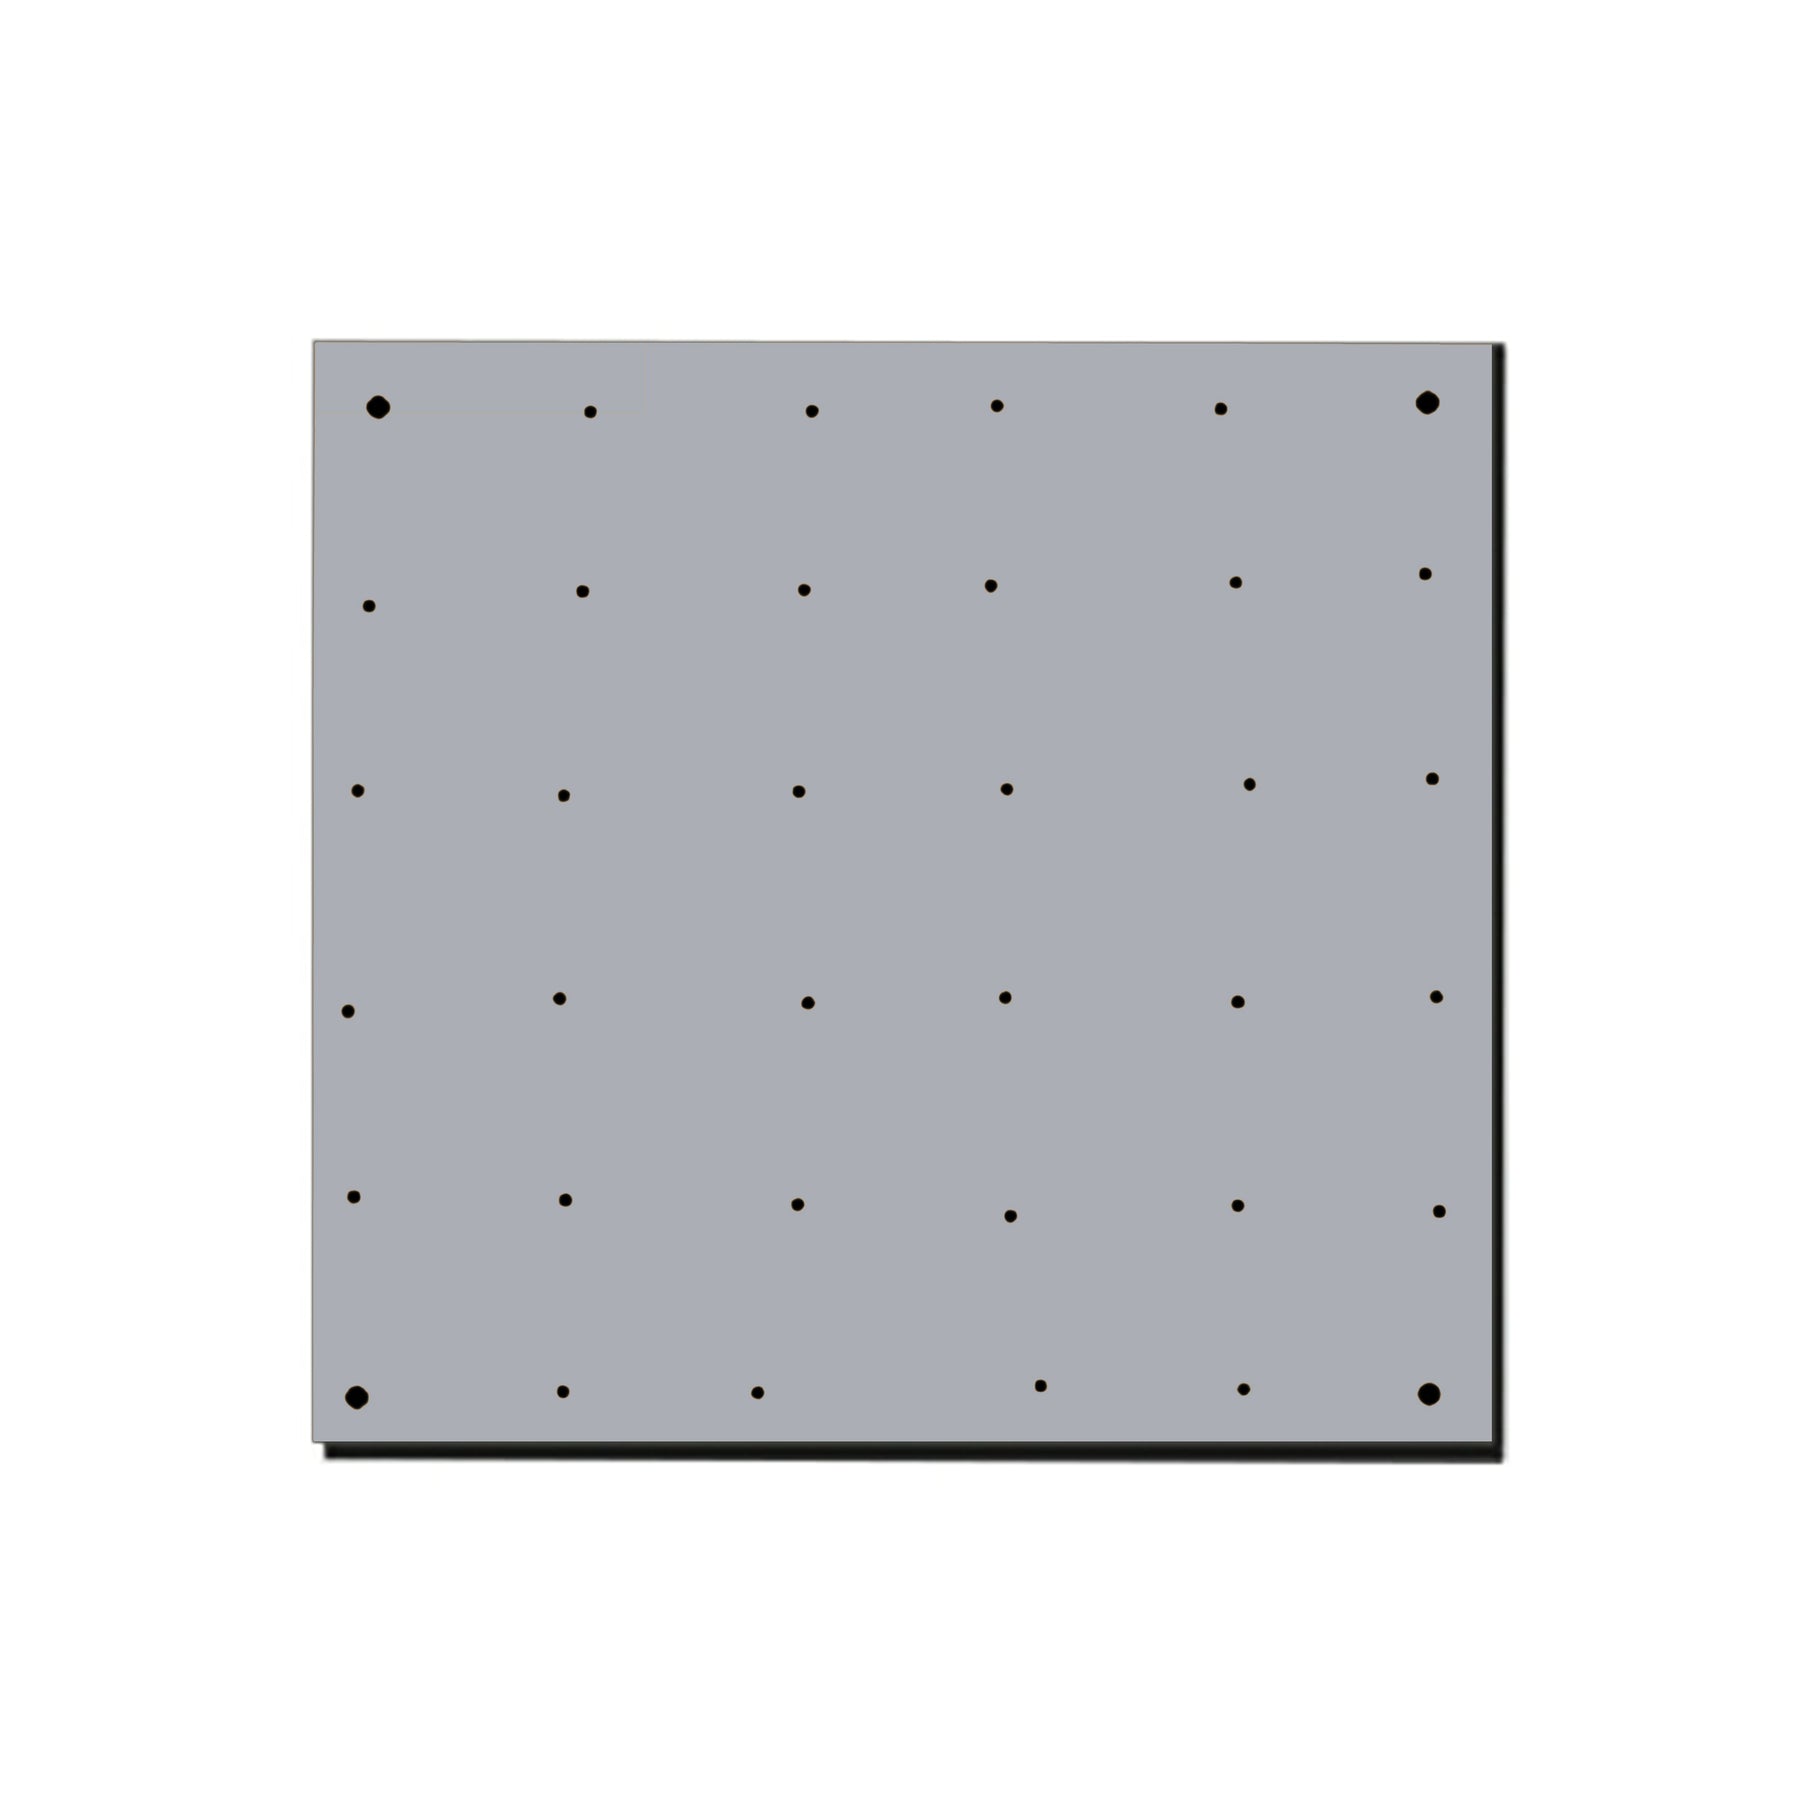 SQUARE ROCK WALL PANEL - FLAT FRAME